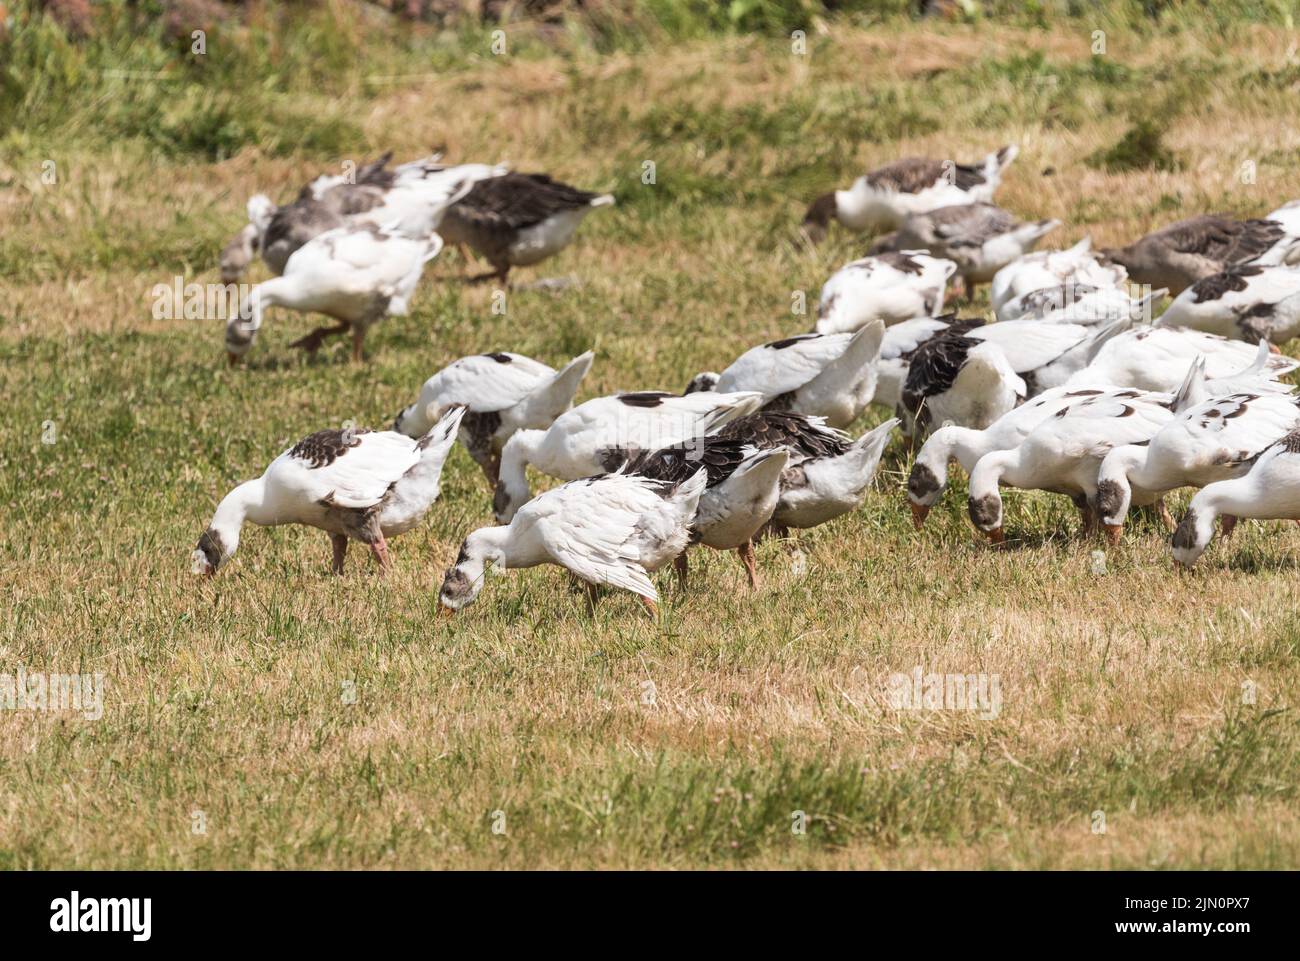 Domestic Geese foraging Stock Photo